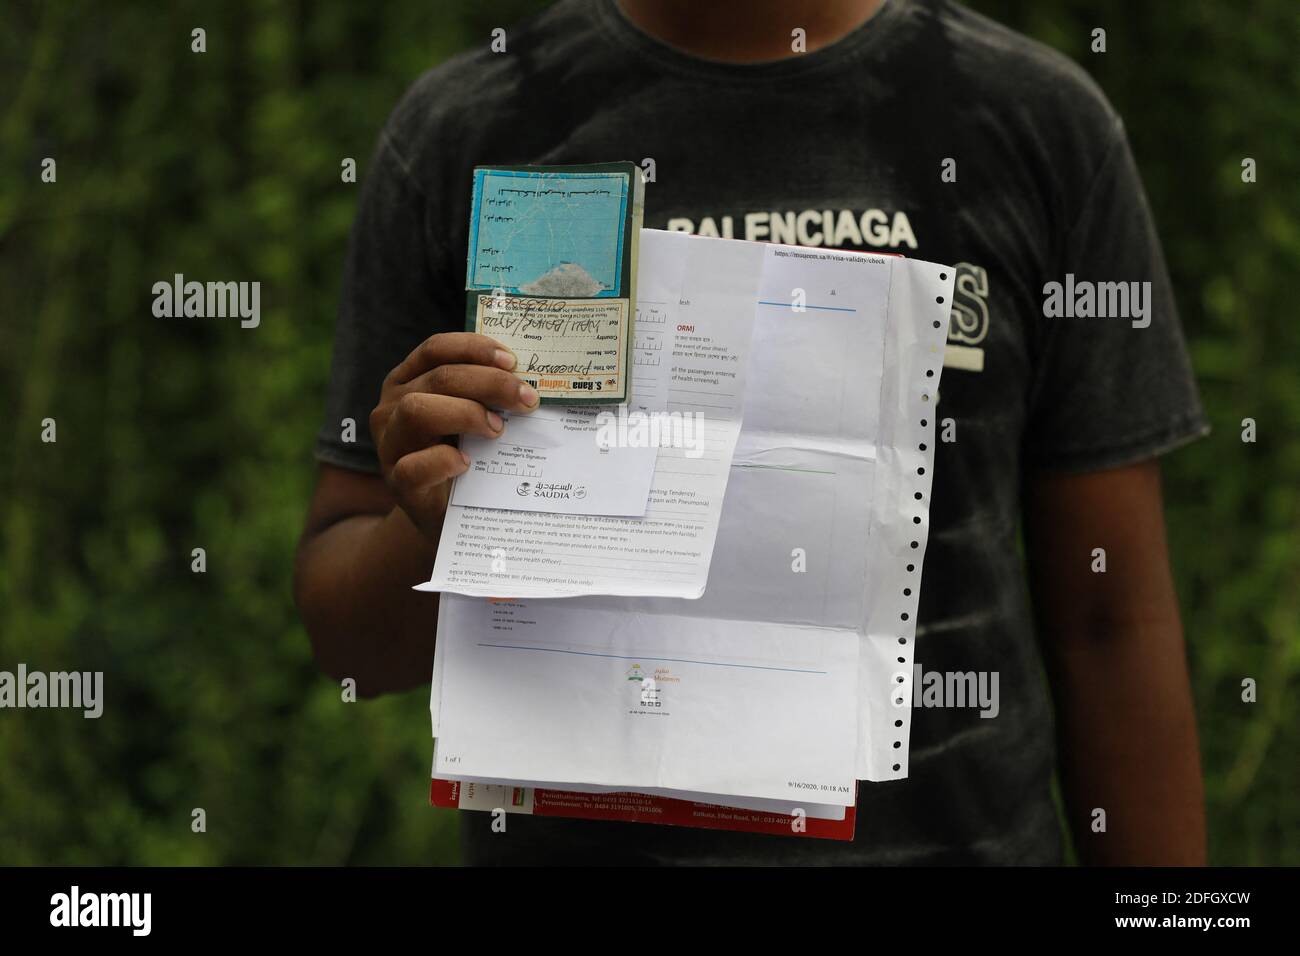 A Bangladeshi migrant worker shows his return ticket to go back to Saudi Arabia after, in Dhaka, Bangladesh, on September 24, 2020. Saudia has begun selling tickets in Dhaka, ending days of wait and demonstration by stranded Bangladeshi migrant workers. At least 30,000 Bangladeshi expatriate workers are waiting to return to their workplaces in Saudi Arabia, said an official of Saudi Airlines. More than 2 million Bangladeshi expatriates work in Saudi Arabia. Nearly half of the $18.2 billion remittances received by Bangladesh in the 2019-20 fiscal years came from the Middle-Eastern kingdom. Phot Stock Photo